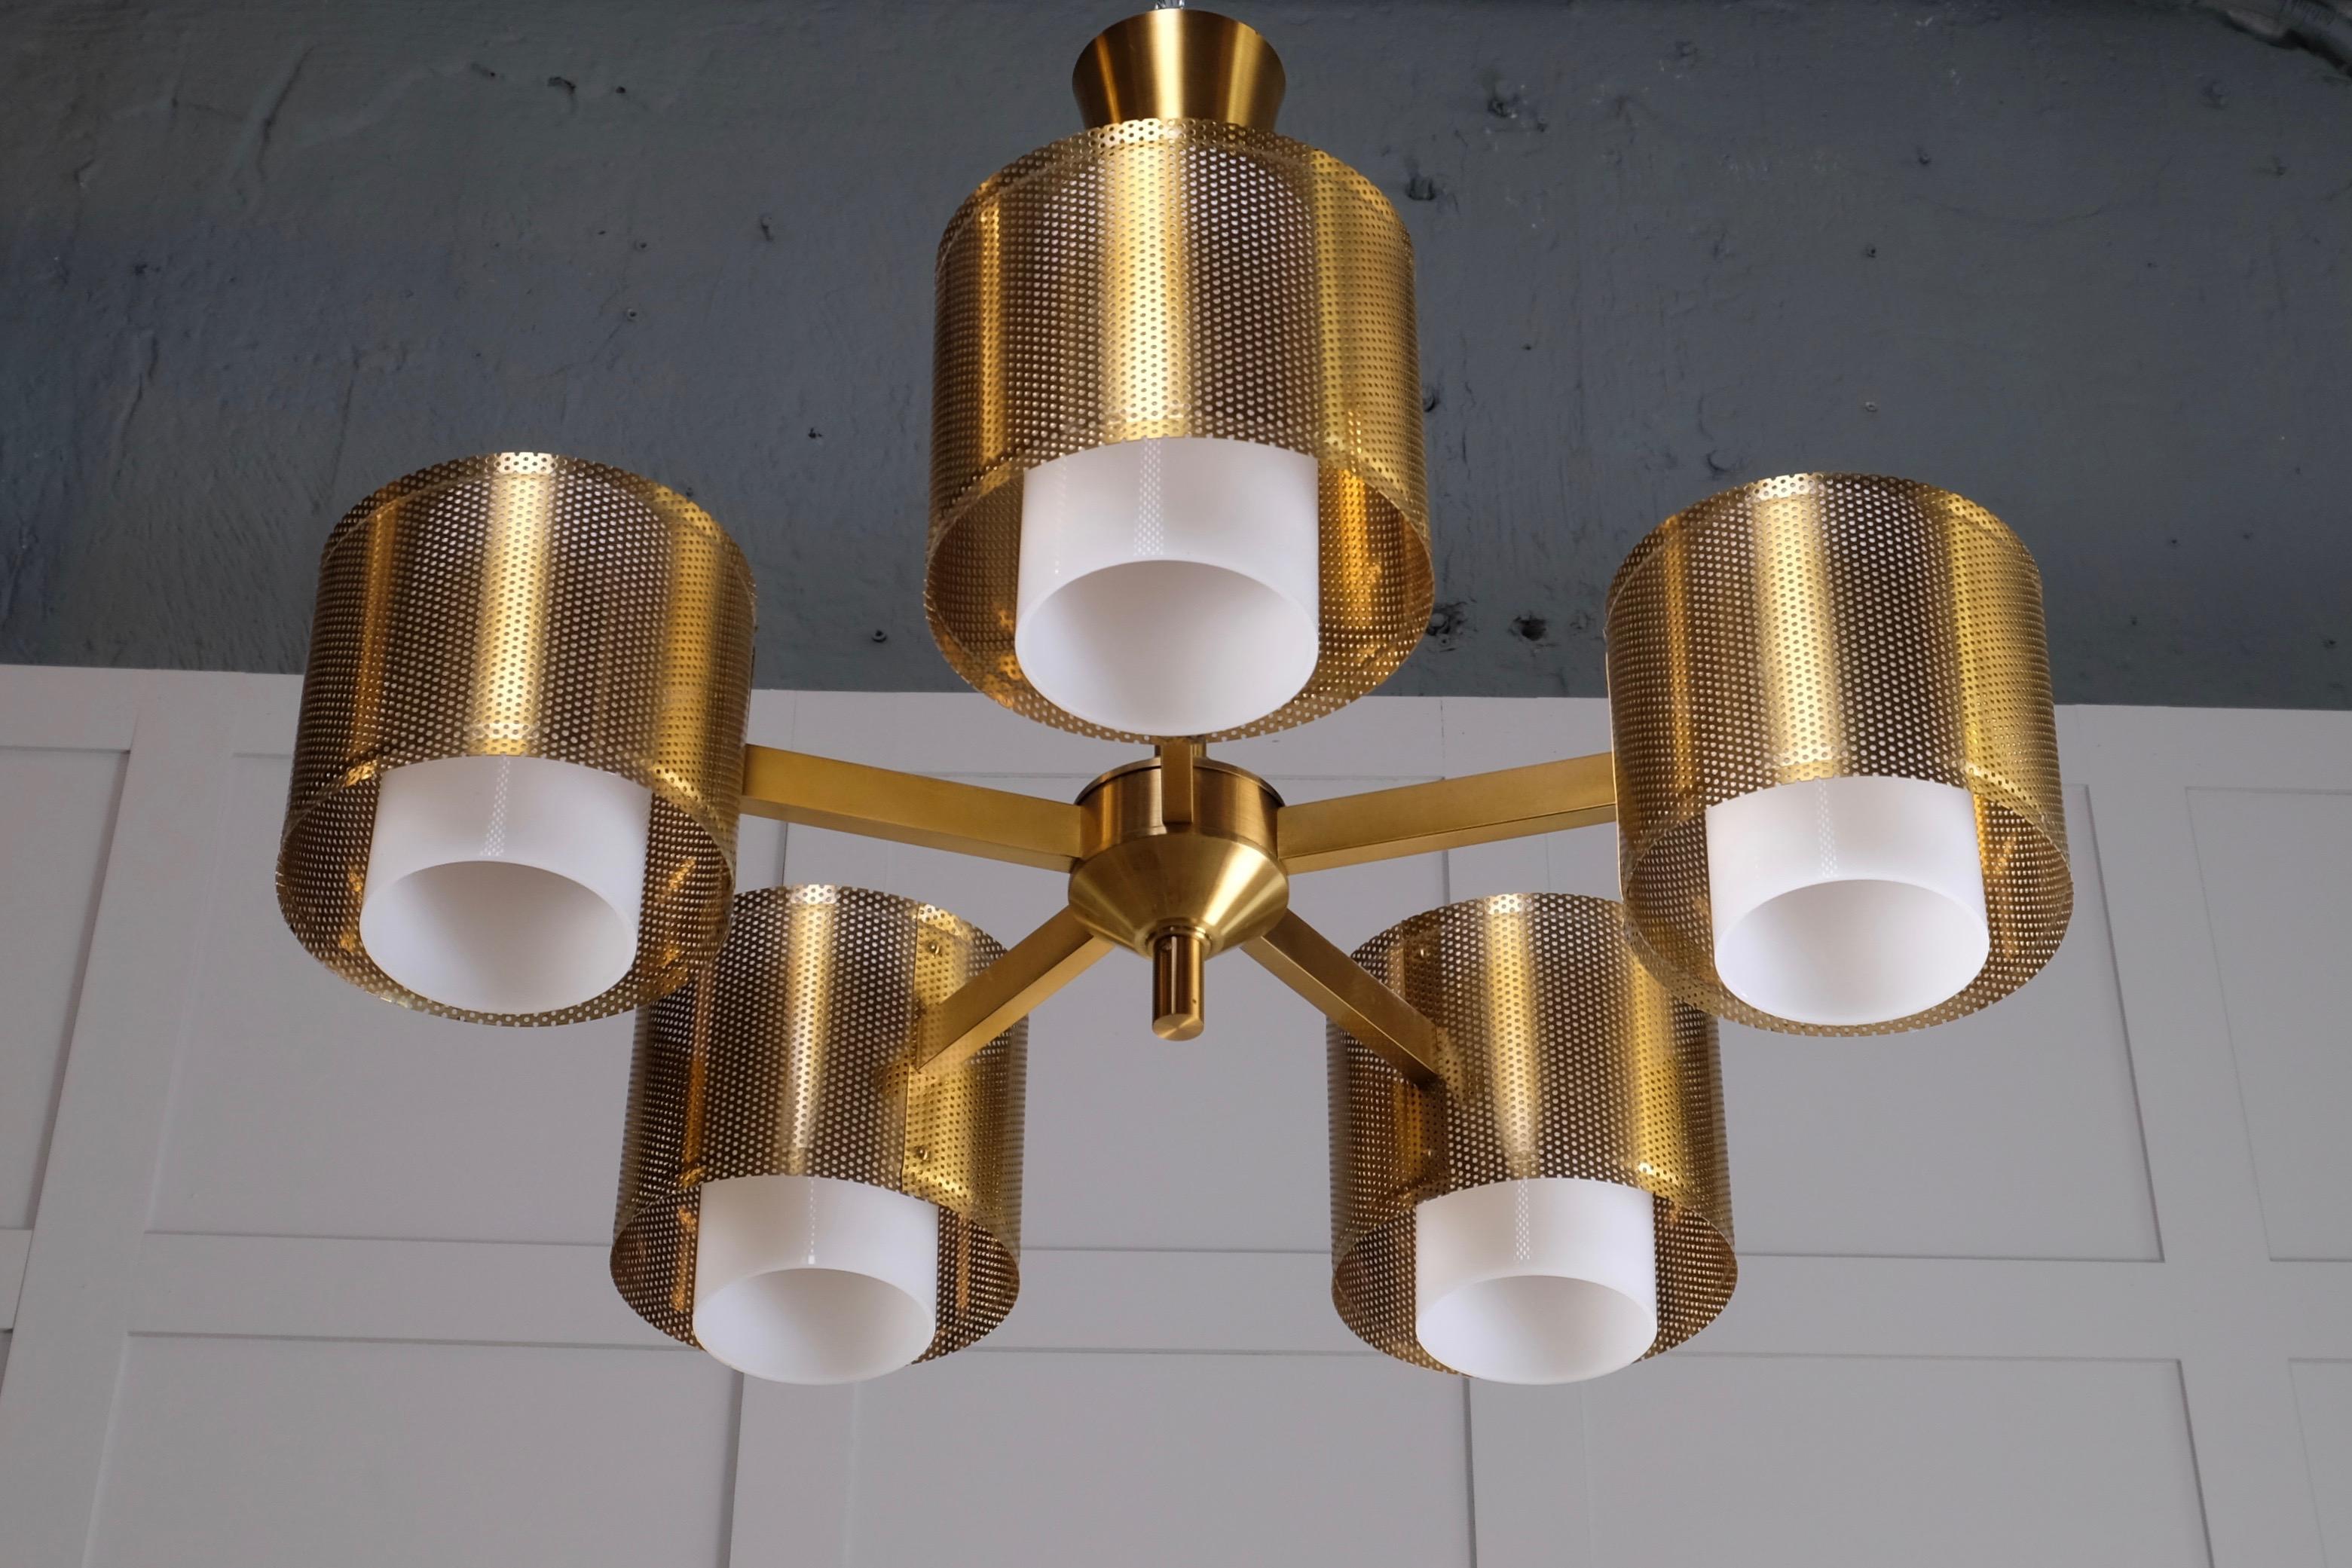 Mid-20th Century Brass Ceiling Lamps by Holger Johansson, Sweden, 1960s For Sale